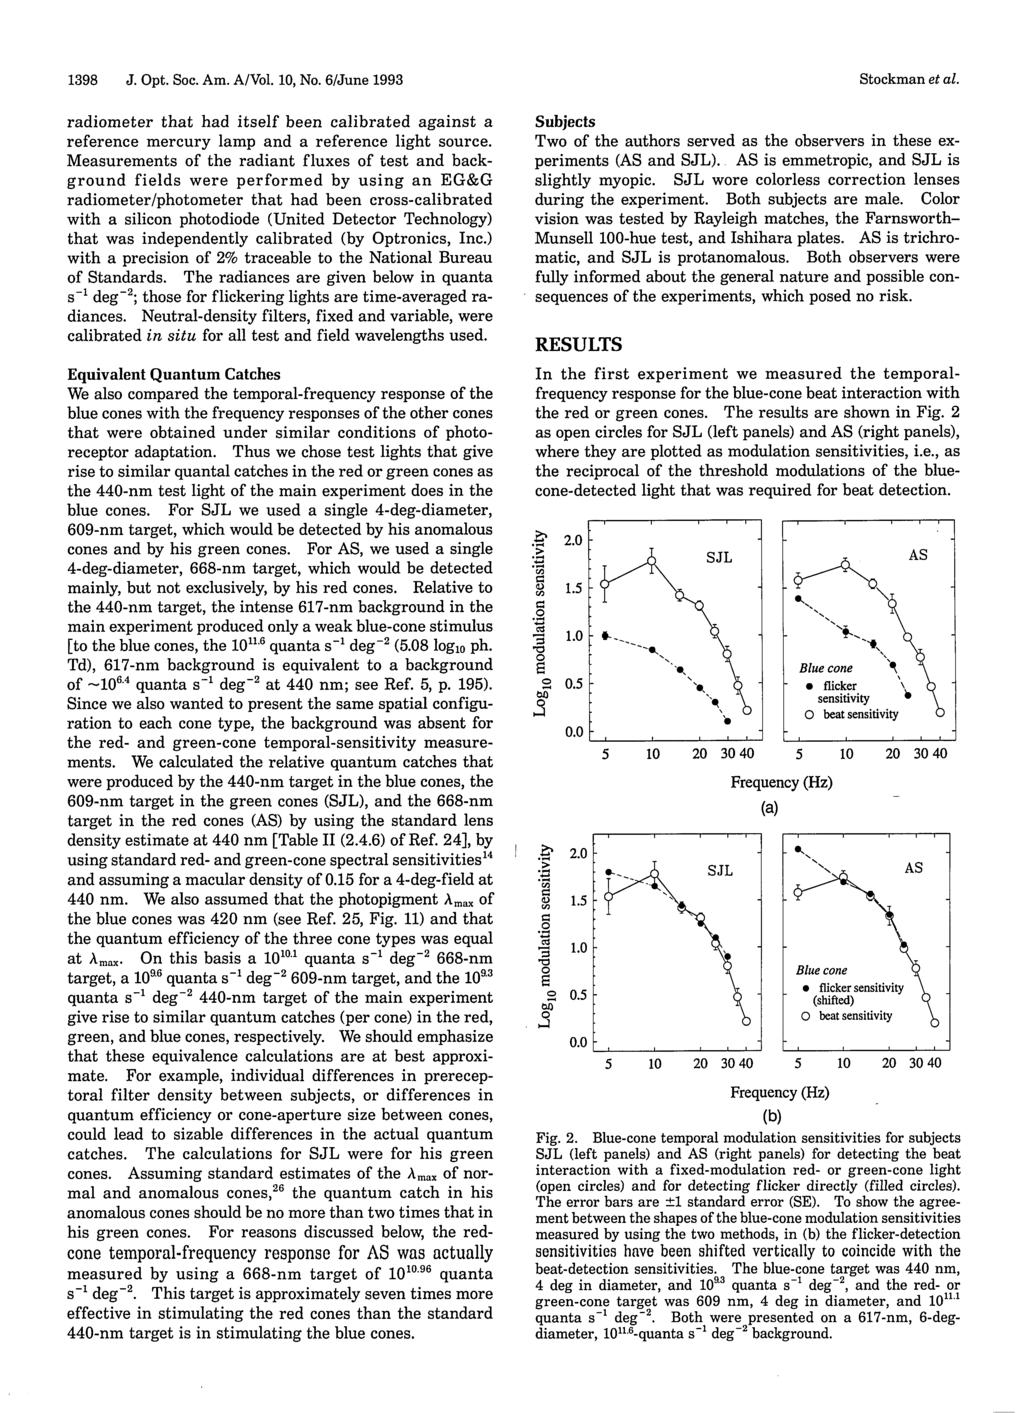 1398 J. Opt. Soc. Am. A/Vol. 1, No. 6/June 1993 radiometer that had itself been calibrated against a reference mercury lamp and a reference light source.